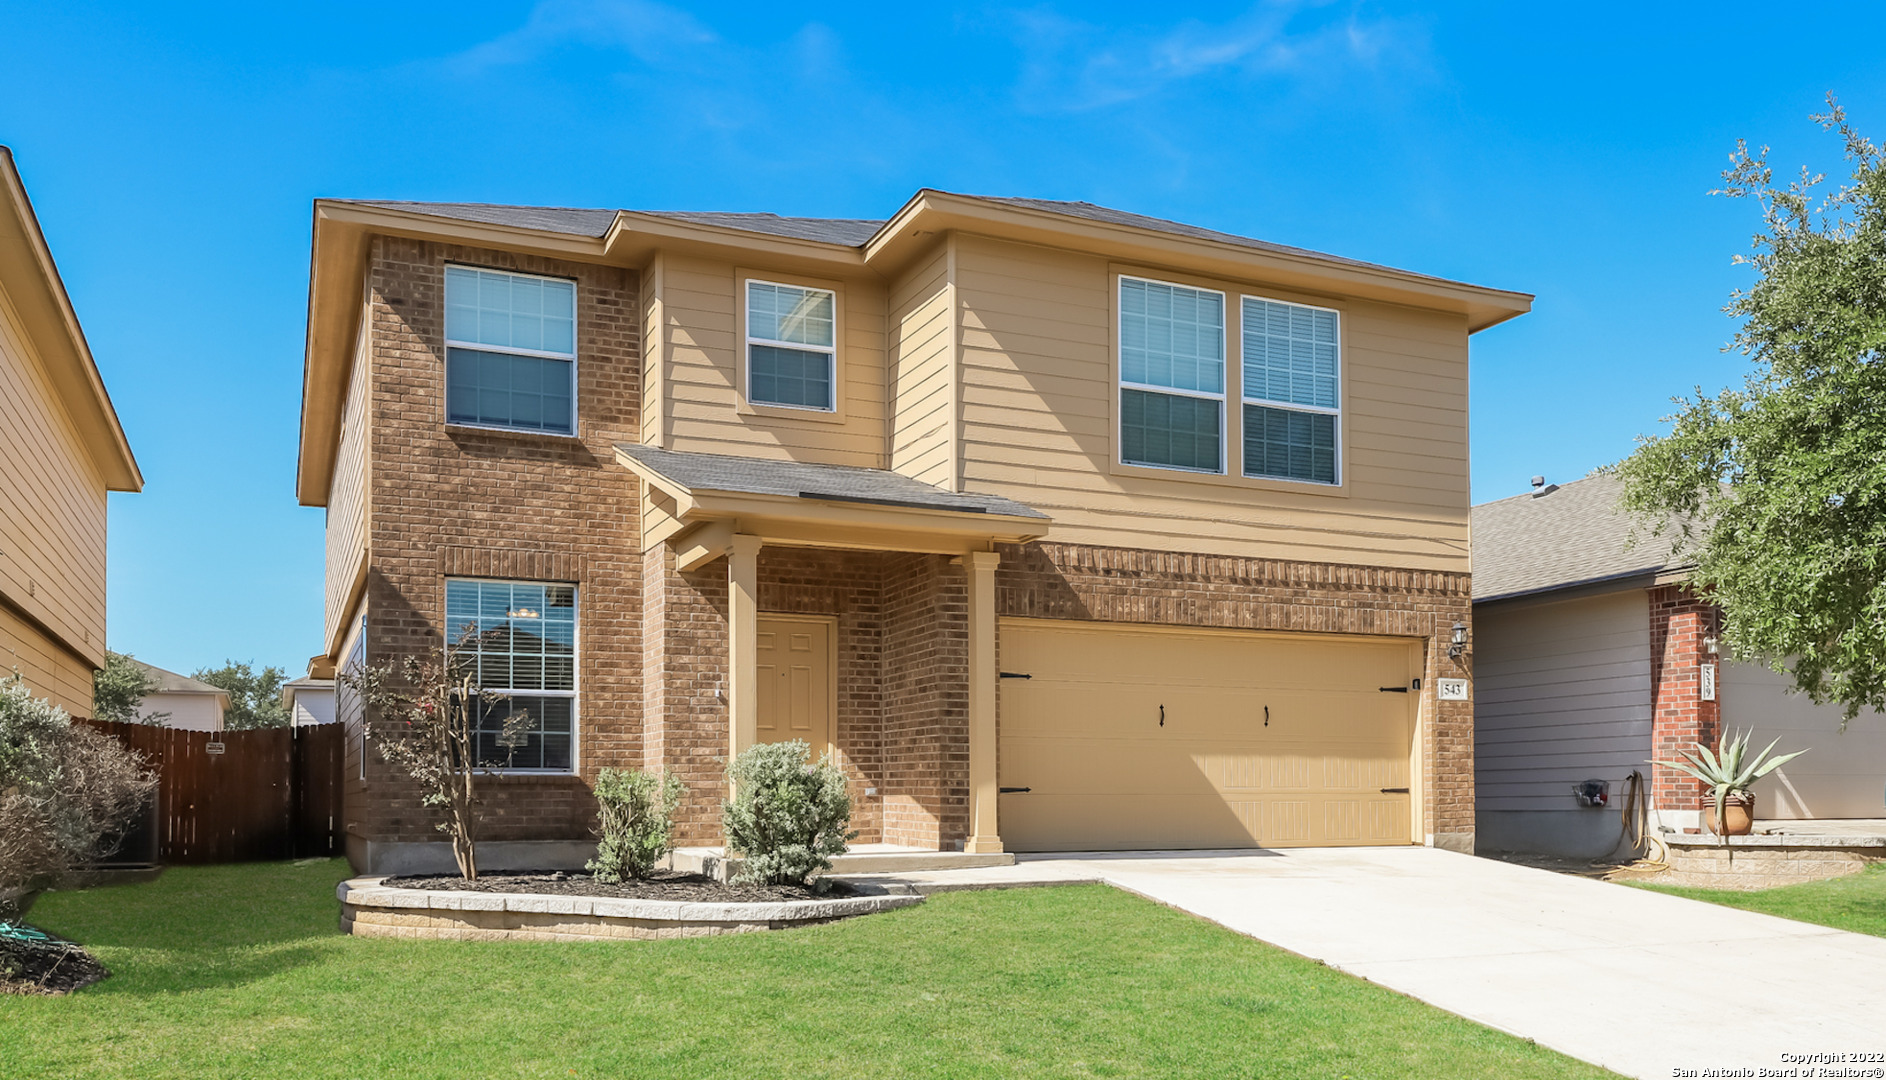 Beautiful home with lots of natural light. Open floor plan with open concept kitchen.  Oversized lot upstairs.  Great amenities with easy access to Seaworld, Lackland Airforce Base, shopping and dining. A must see!